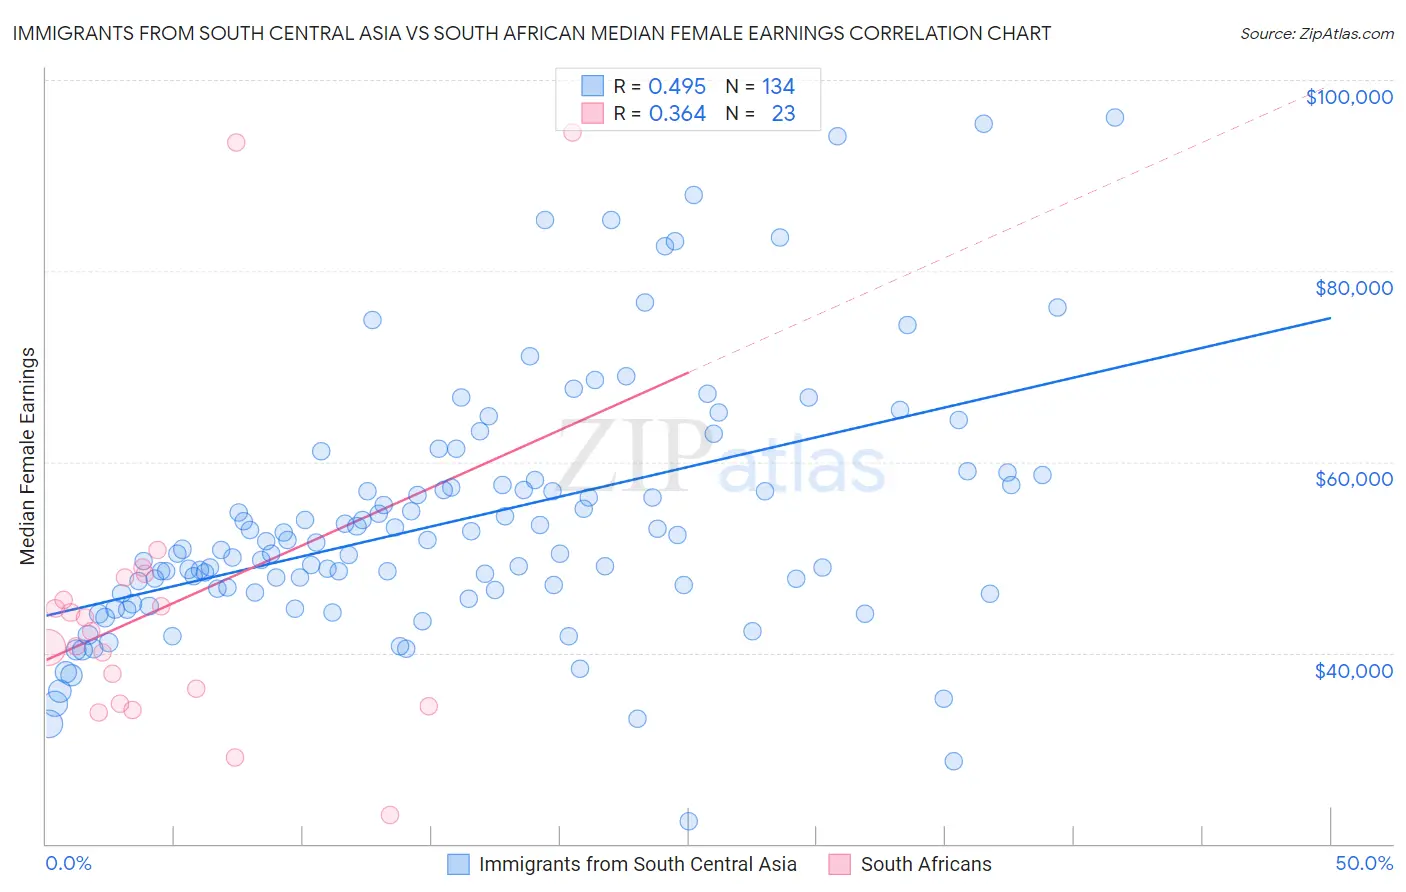 Immigrants from South Central Asia vs South African Median Female Earnings